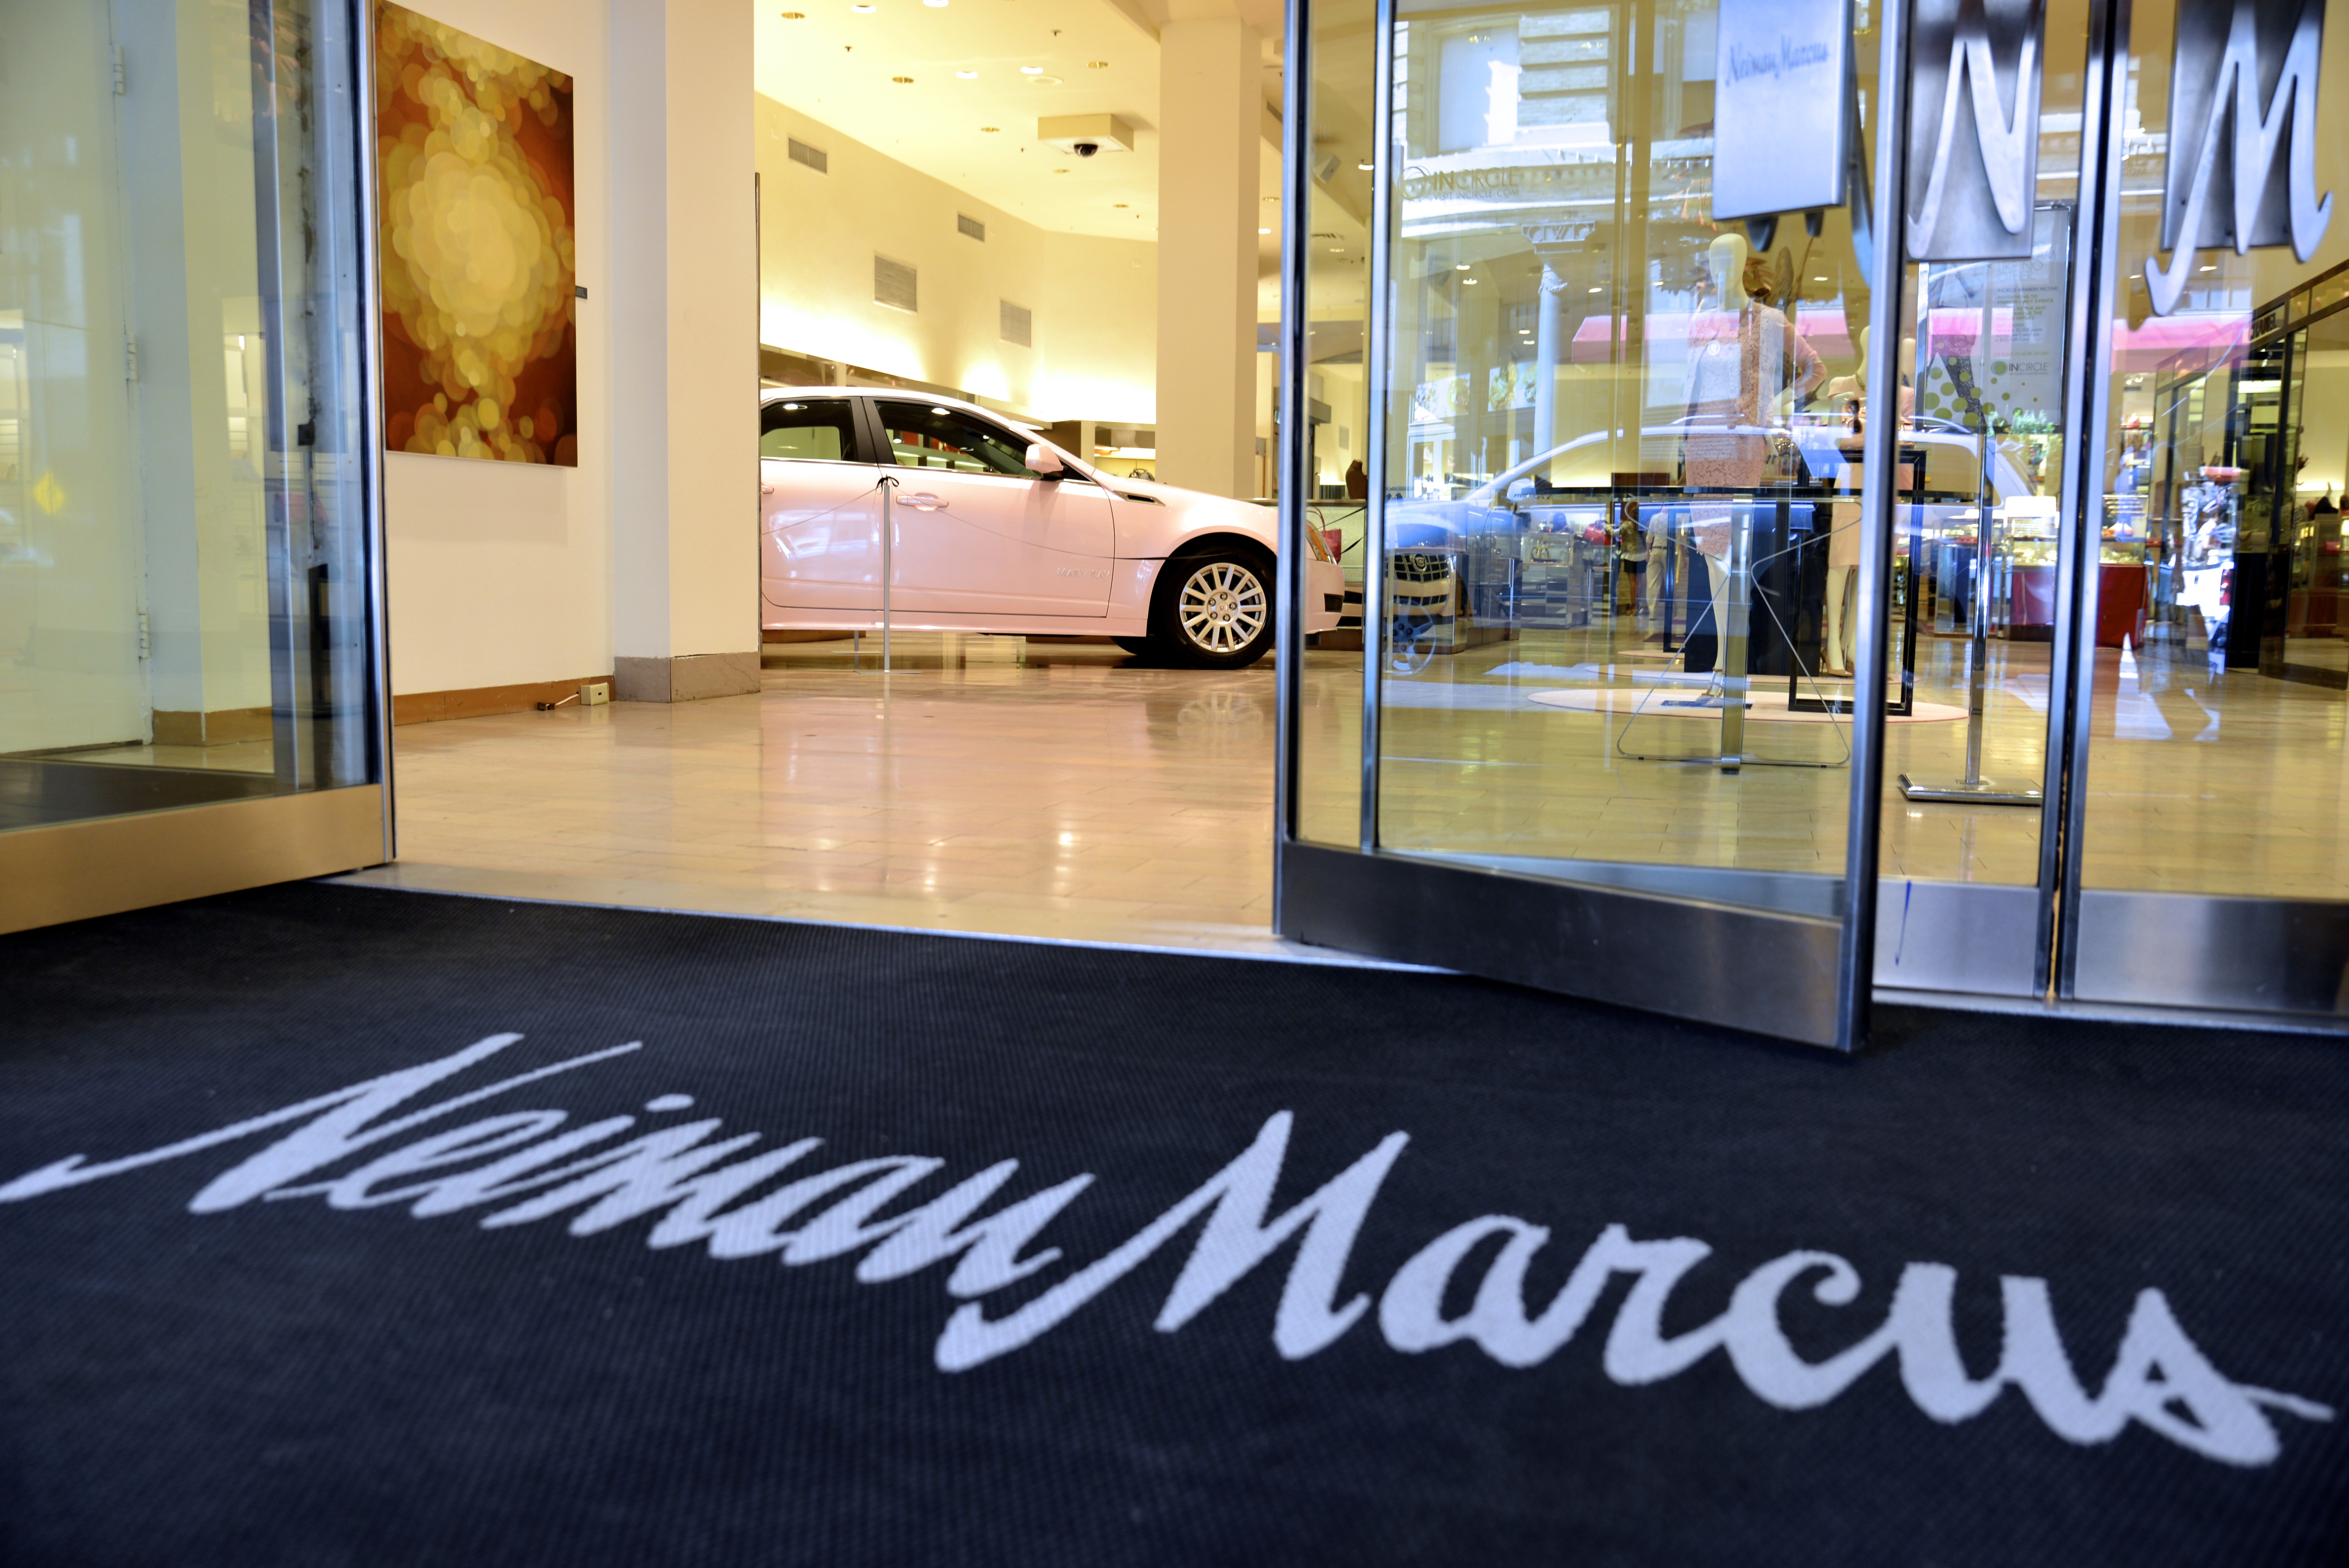 Neiman Marcus - What To Know BEFORE You Go